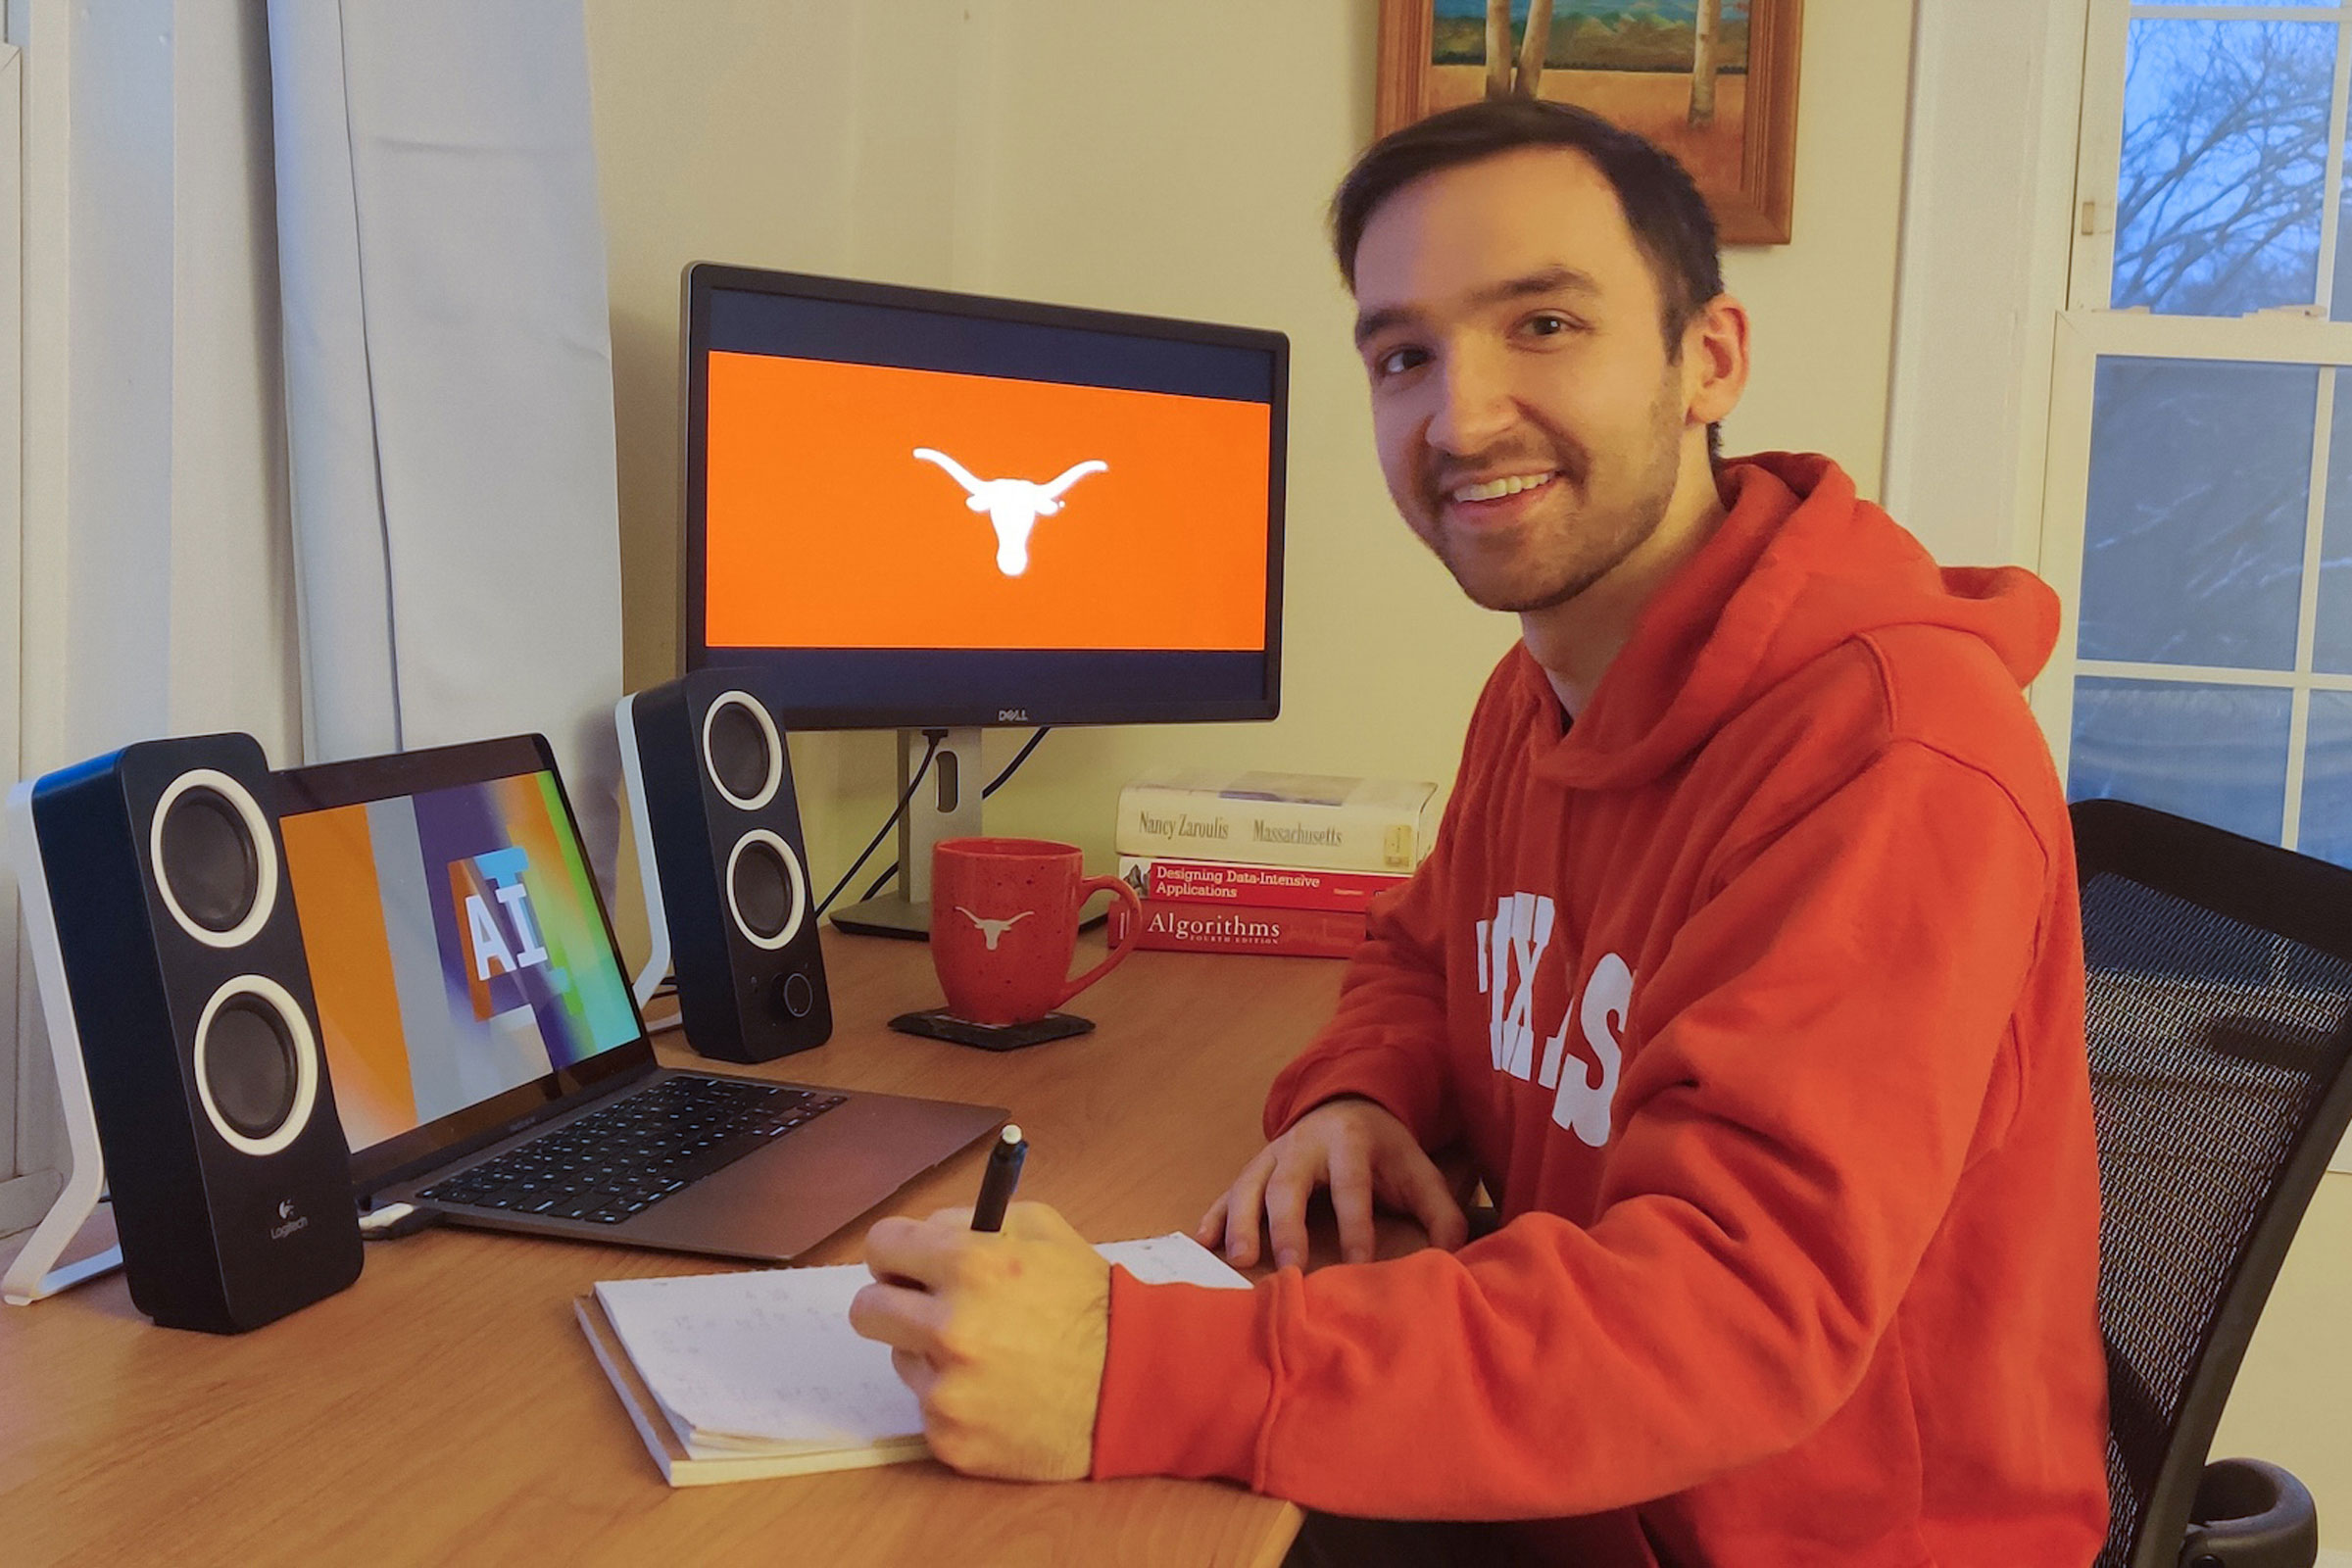 A student wearing a UT sweatshirt sits at a desk with Essentials of AI and a Longhorn silhouette displayed on two screens